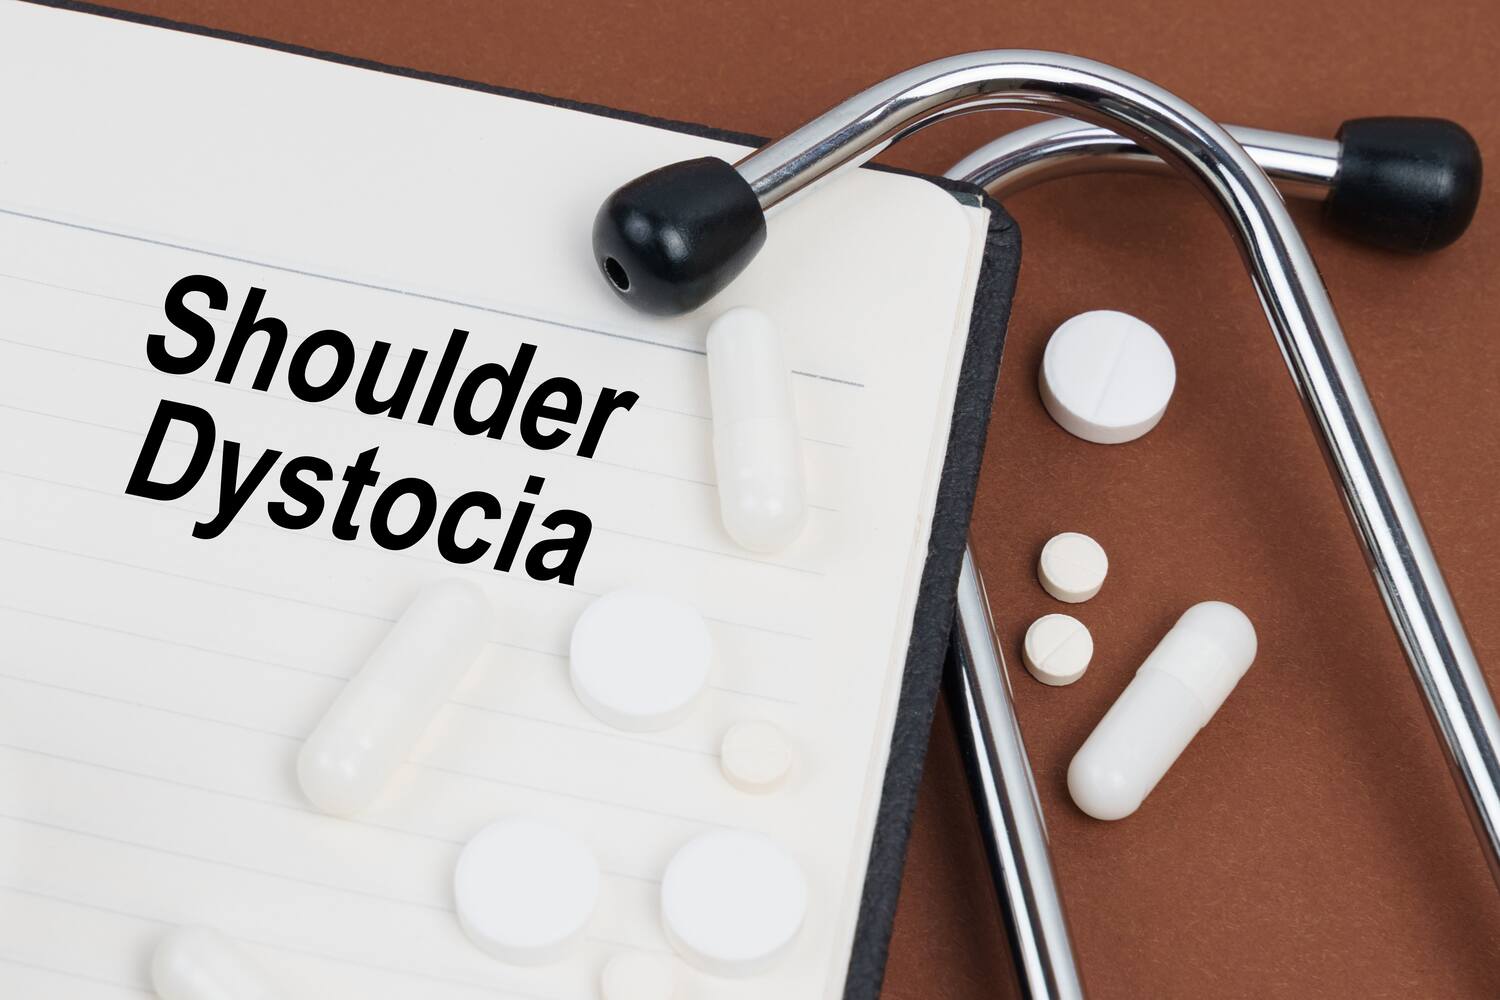 Shoulder Dystocia During Delivery